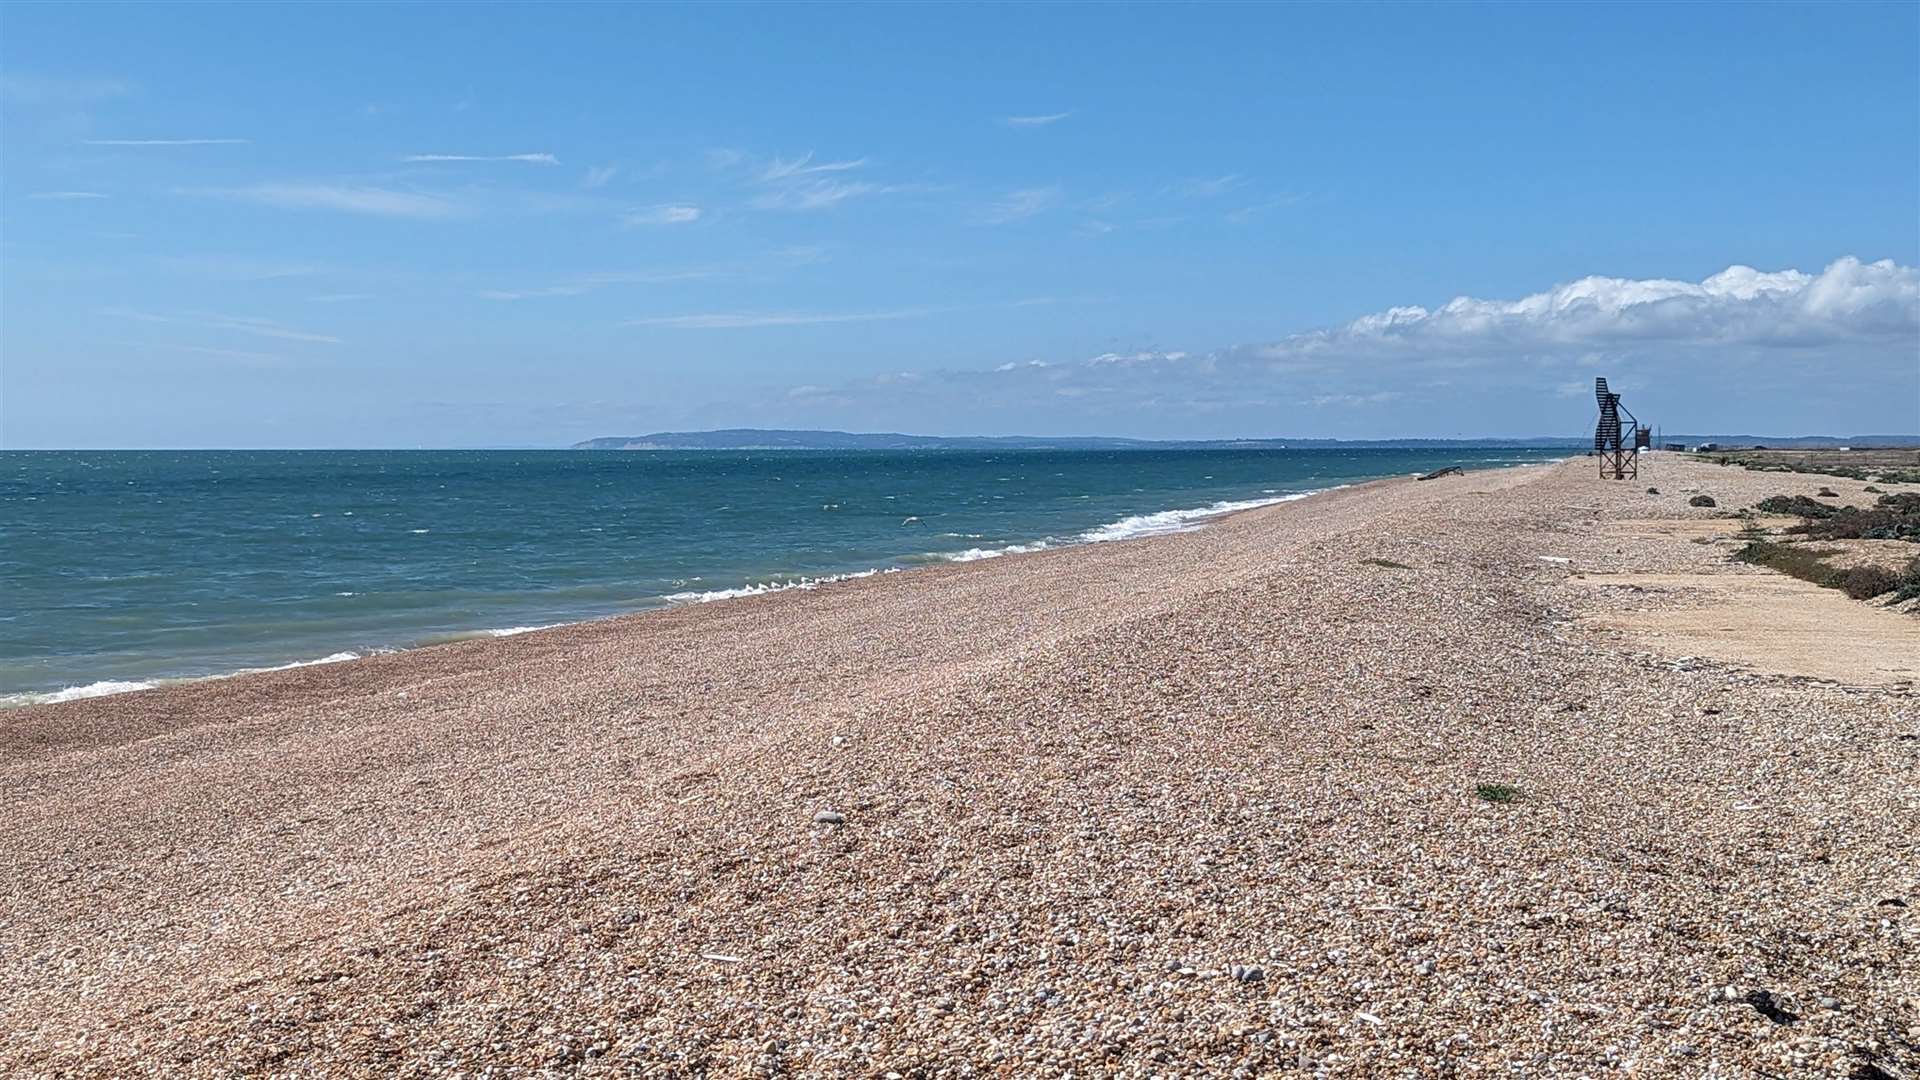 The deserted beach with the Sussex coast lying across the sea